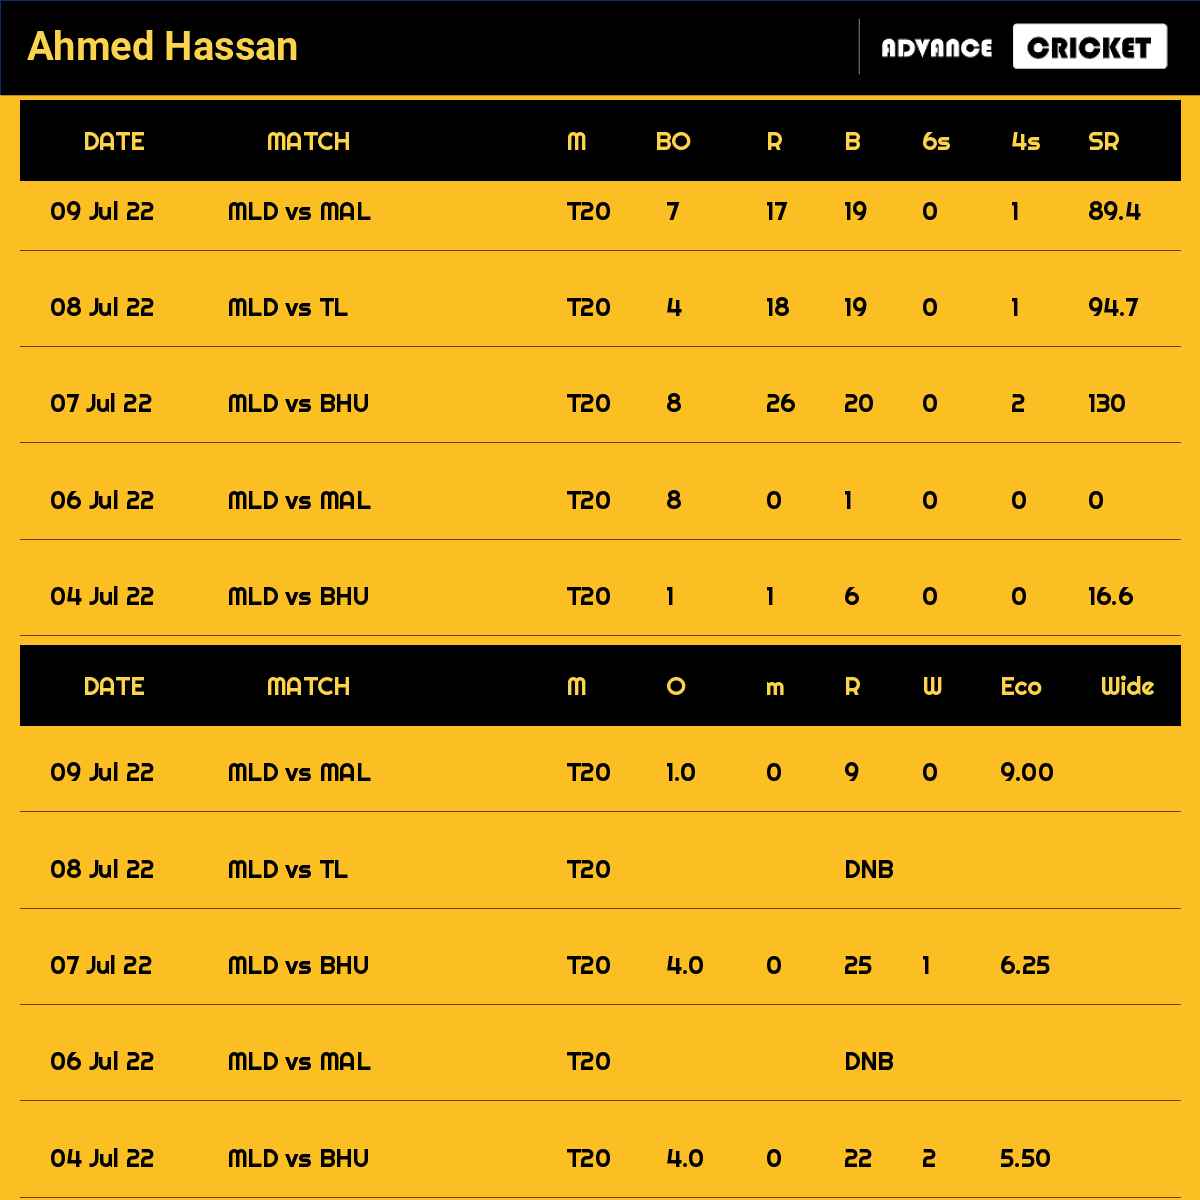 Ahmed Hassan recent matches